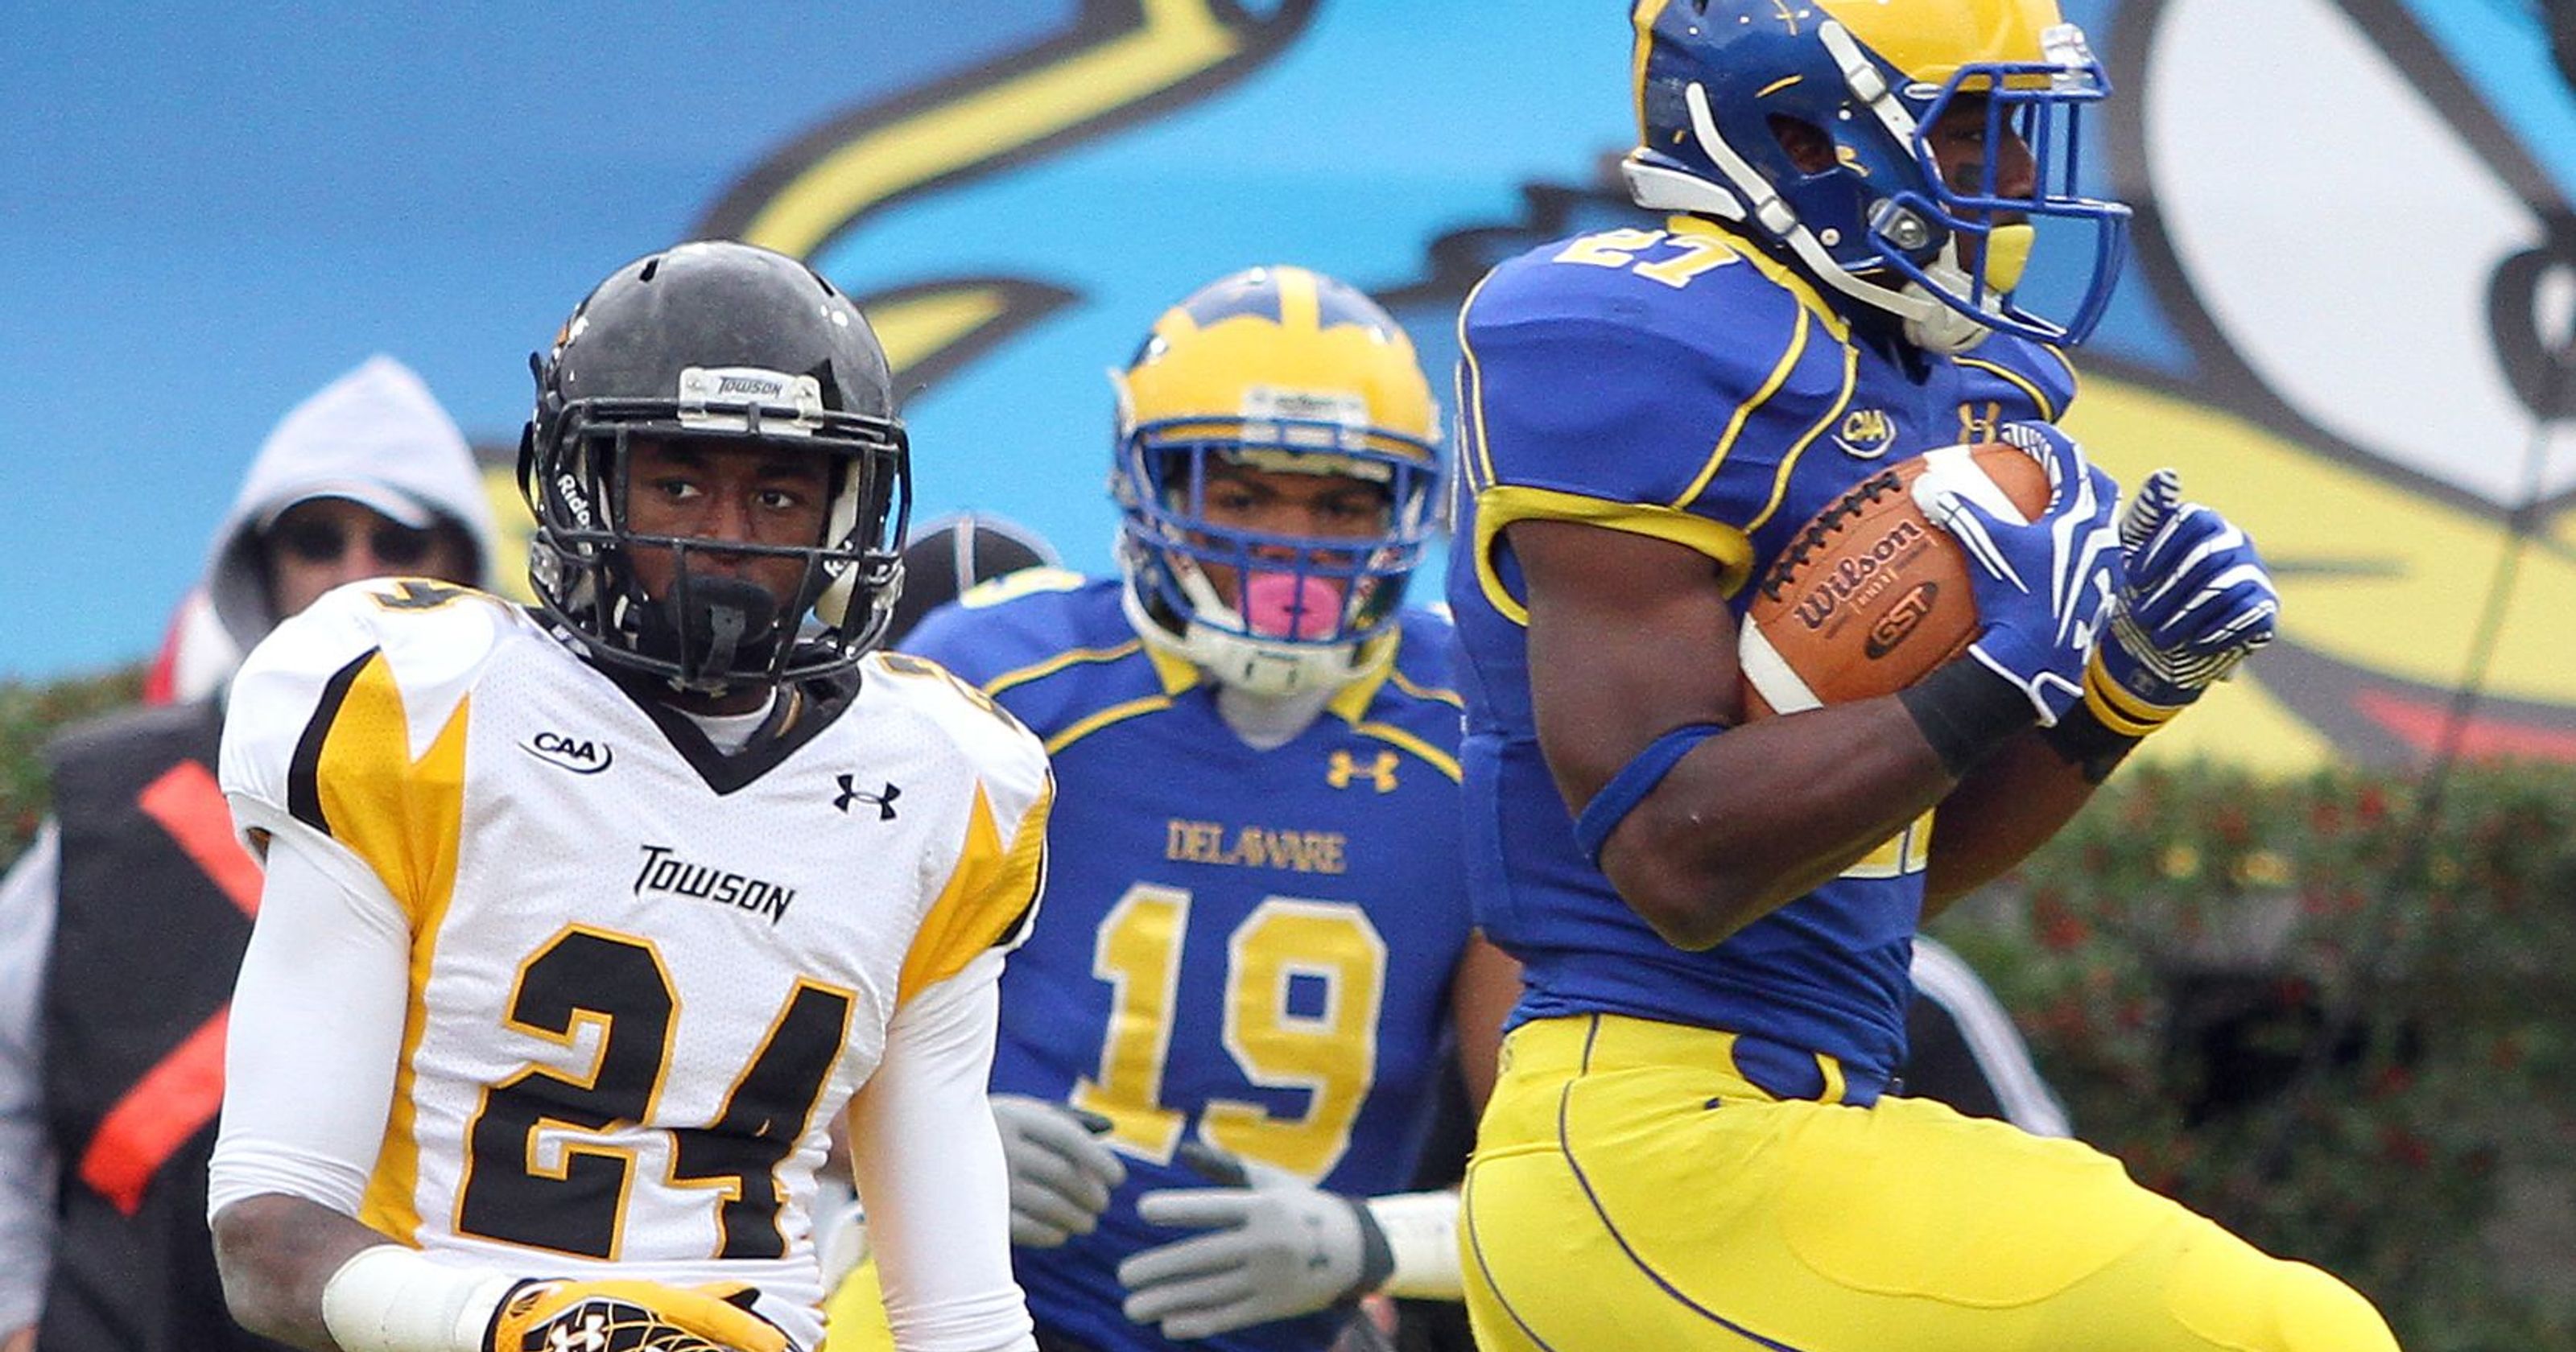 CSJ 2018 Week 9 Preview: Towson at Delaware, How To Watch and Prediction